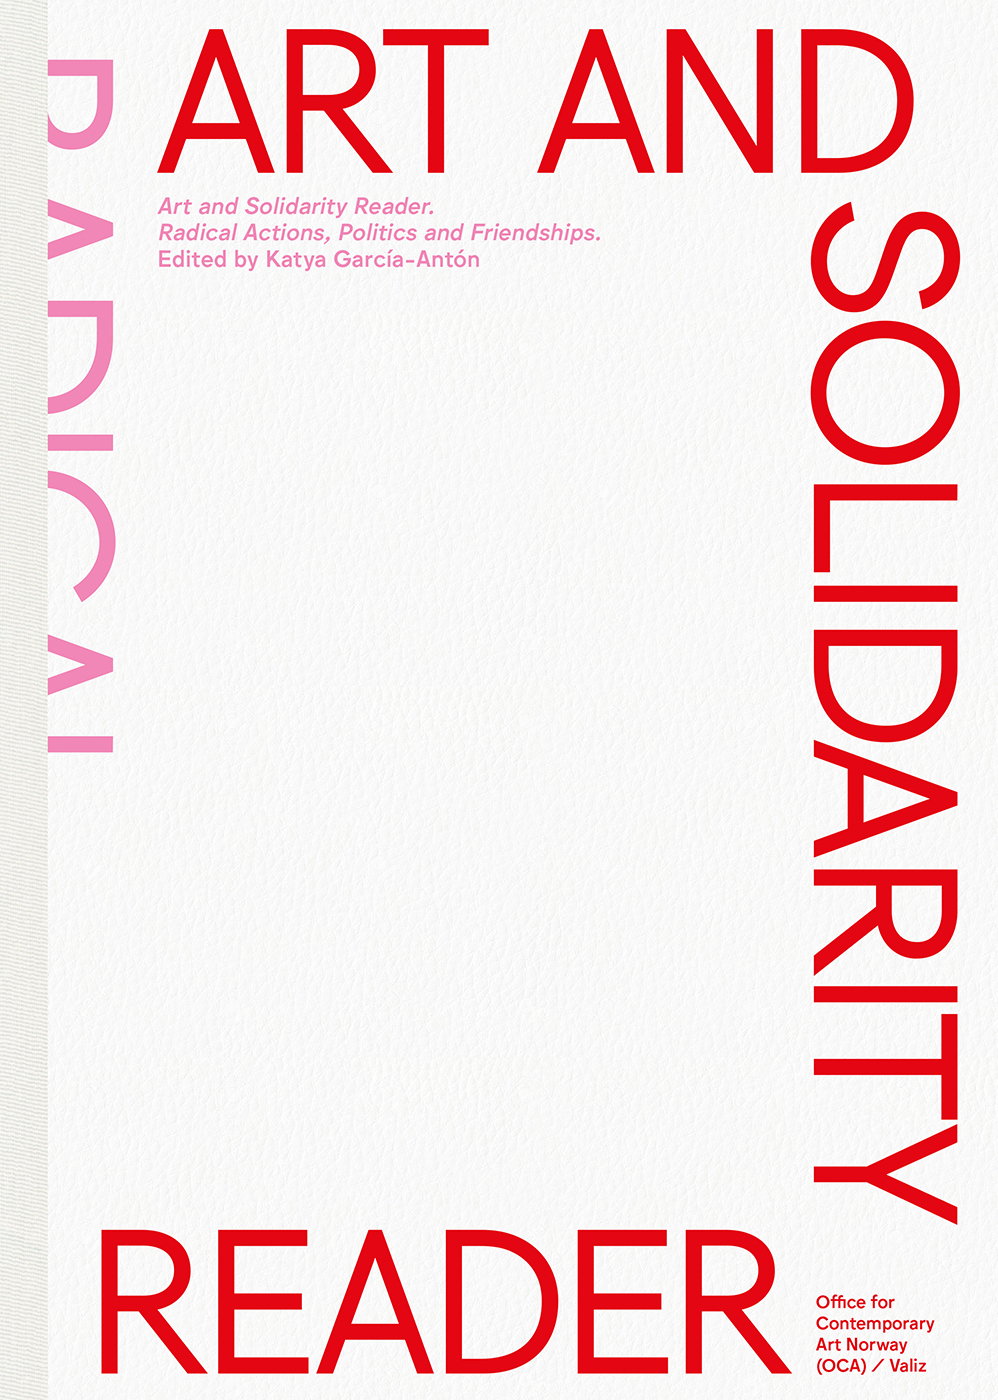 Art and Solidarity Reader—Radical Actions, Politics and Friendships